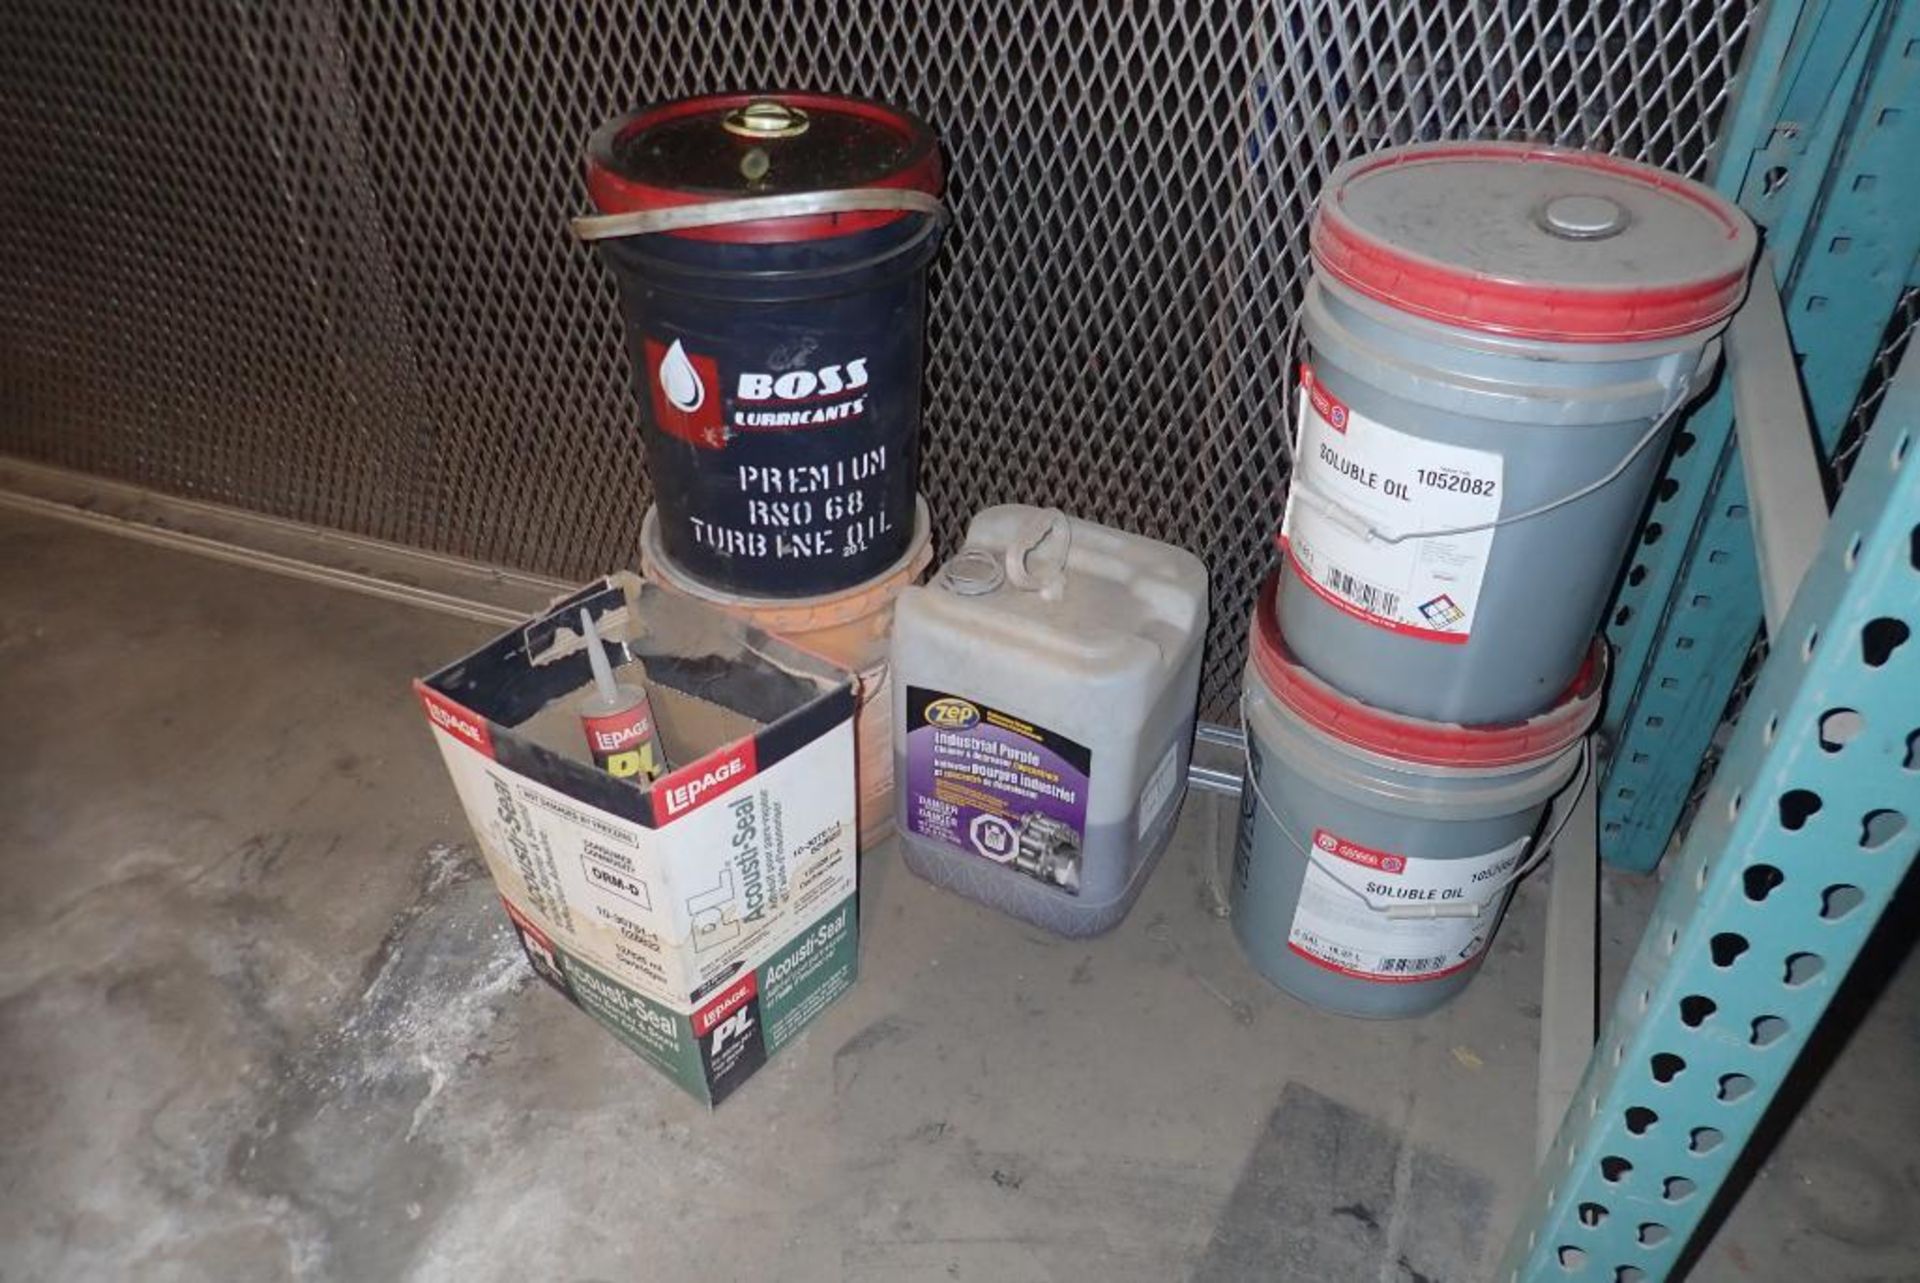 Lot of Asst. Shop Fluid including Oil, Antifreeze, Cutting Oil, Adhesive, etc. - Image 6 of 6